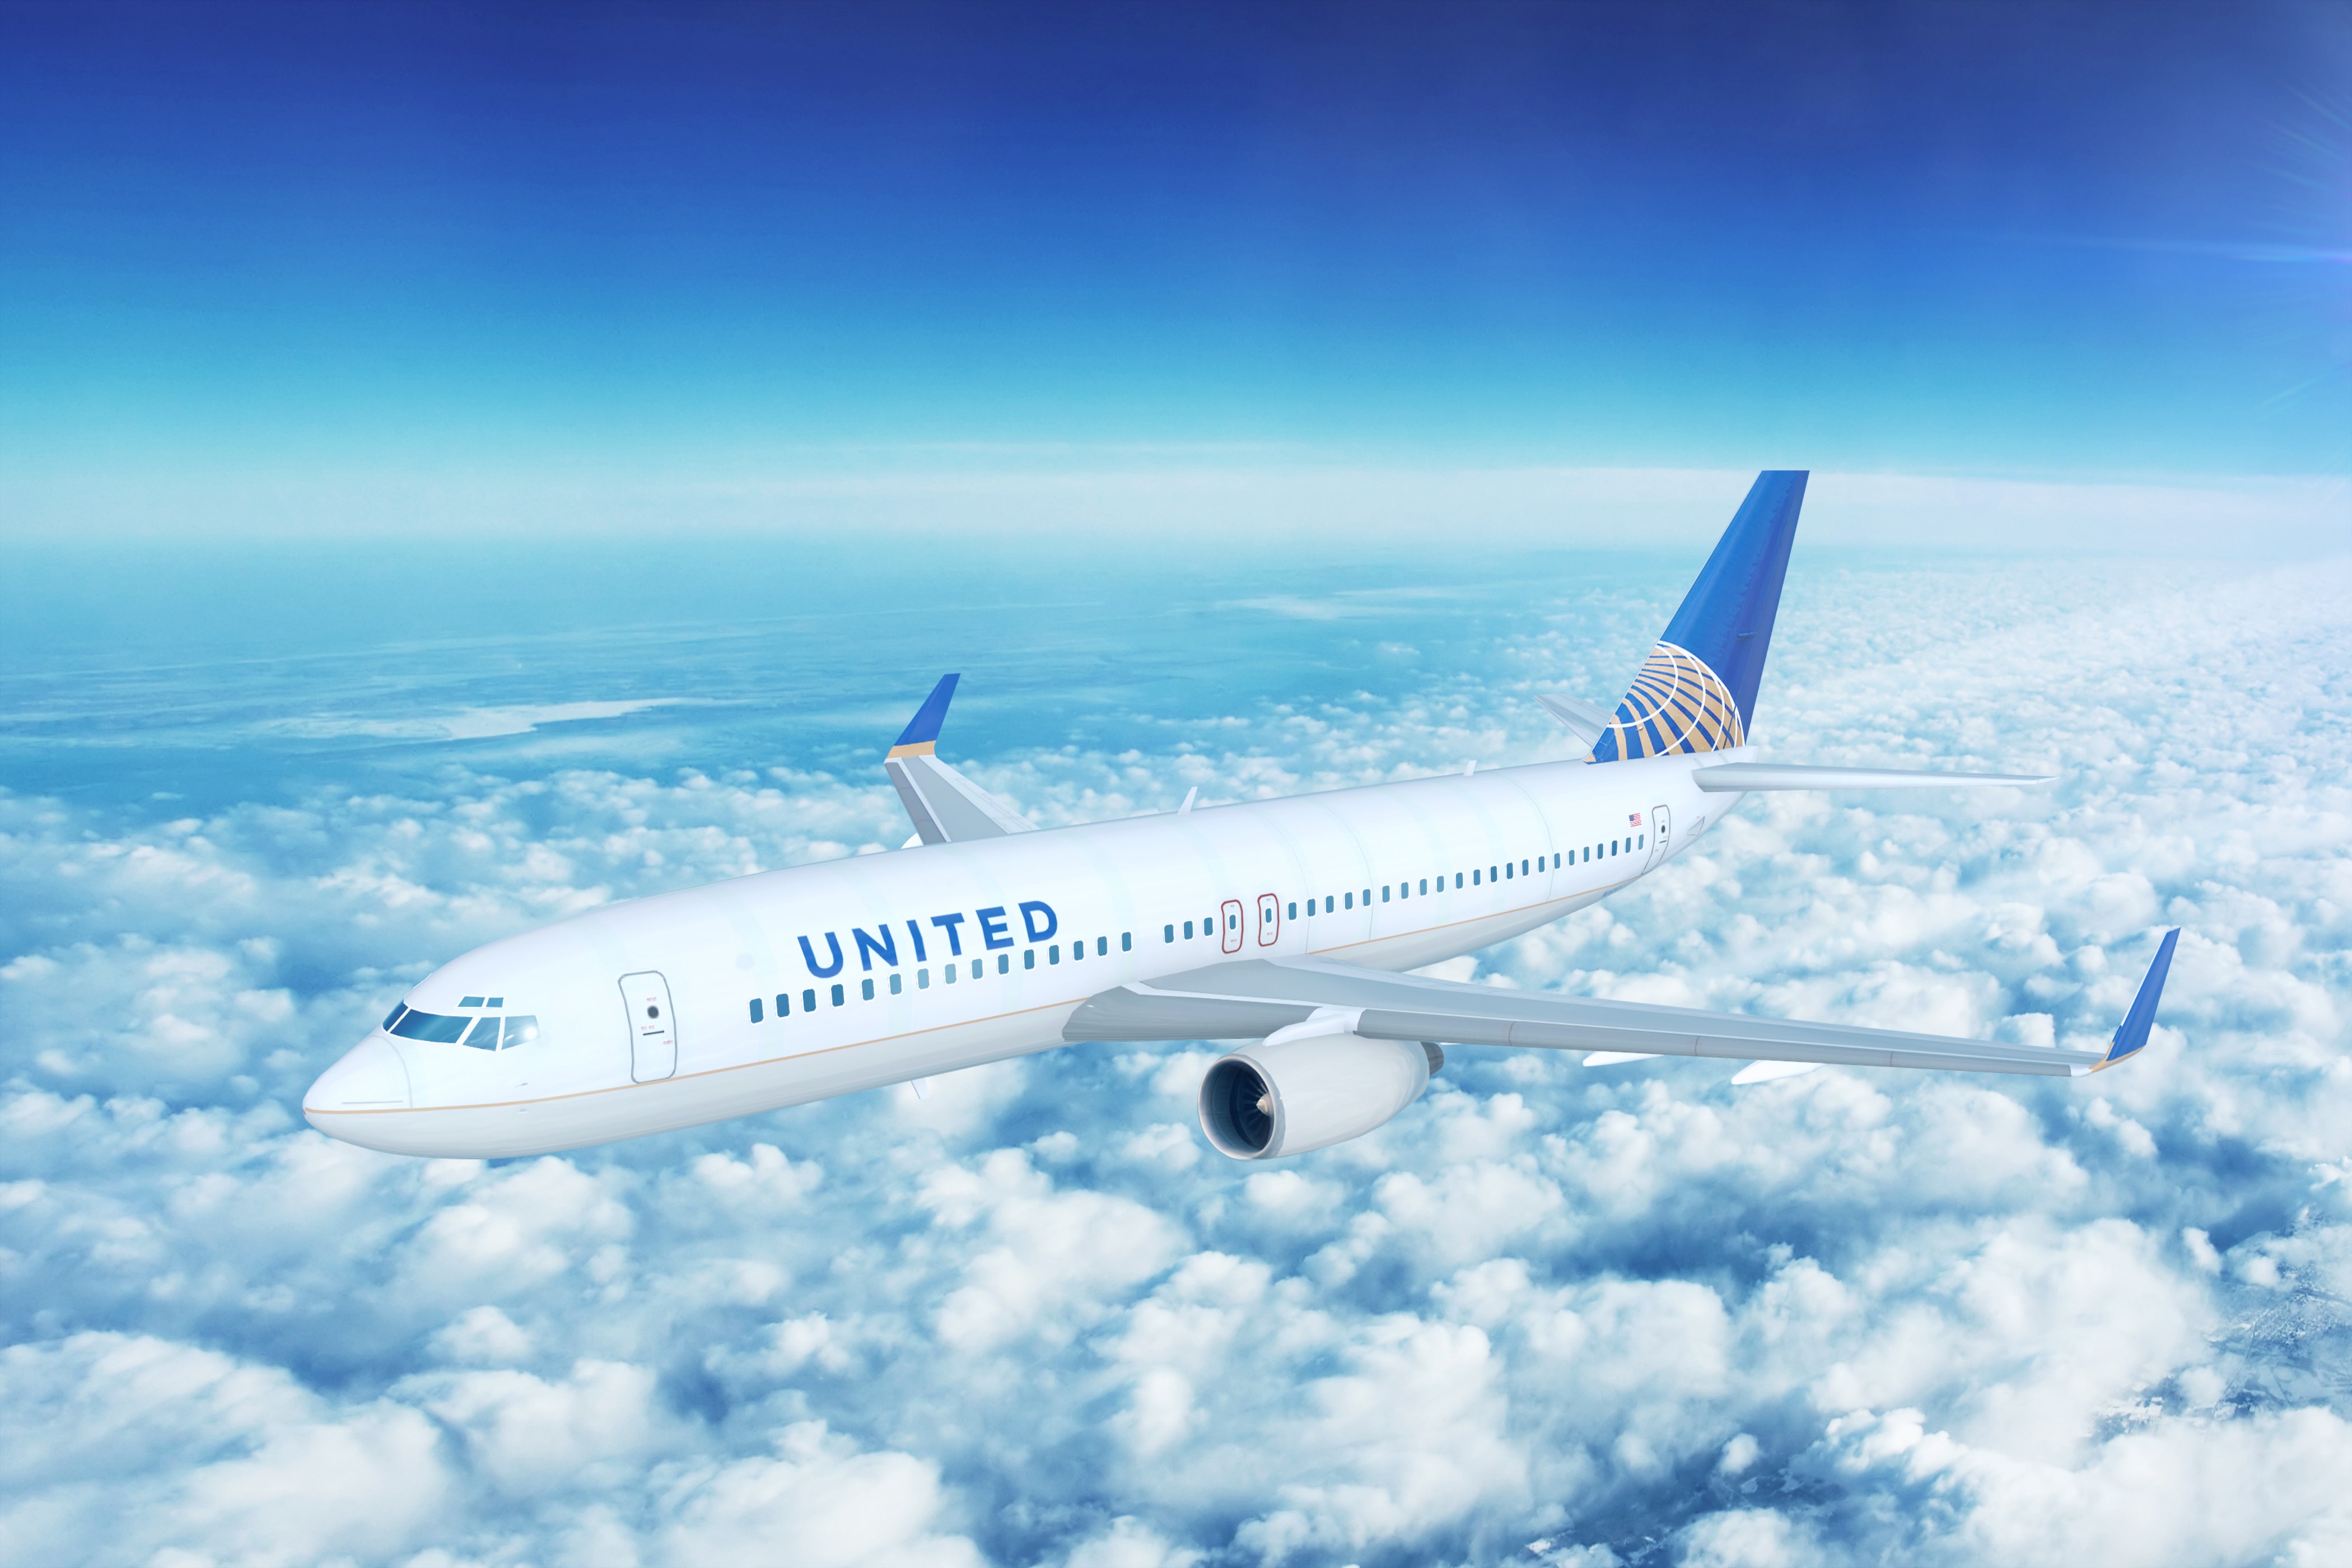 United Airlines Threatens To Suspend Service At JFK Airport: What's Going On?